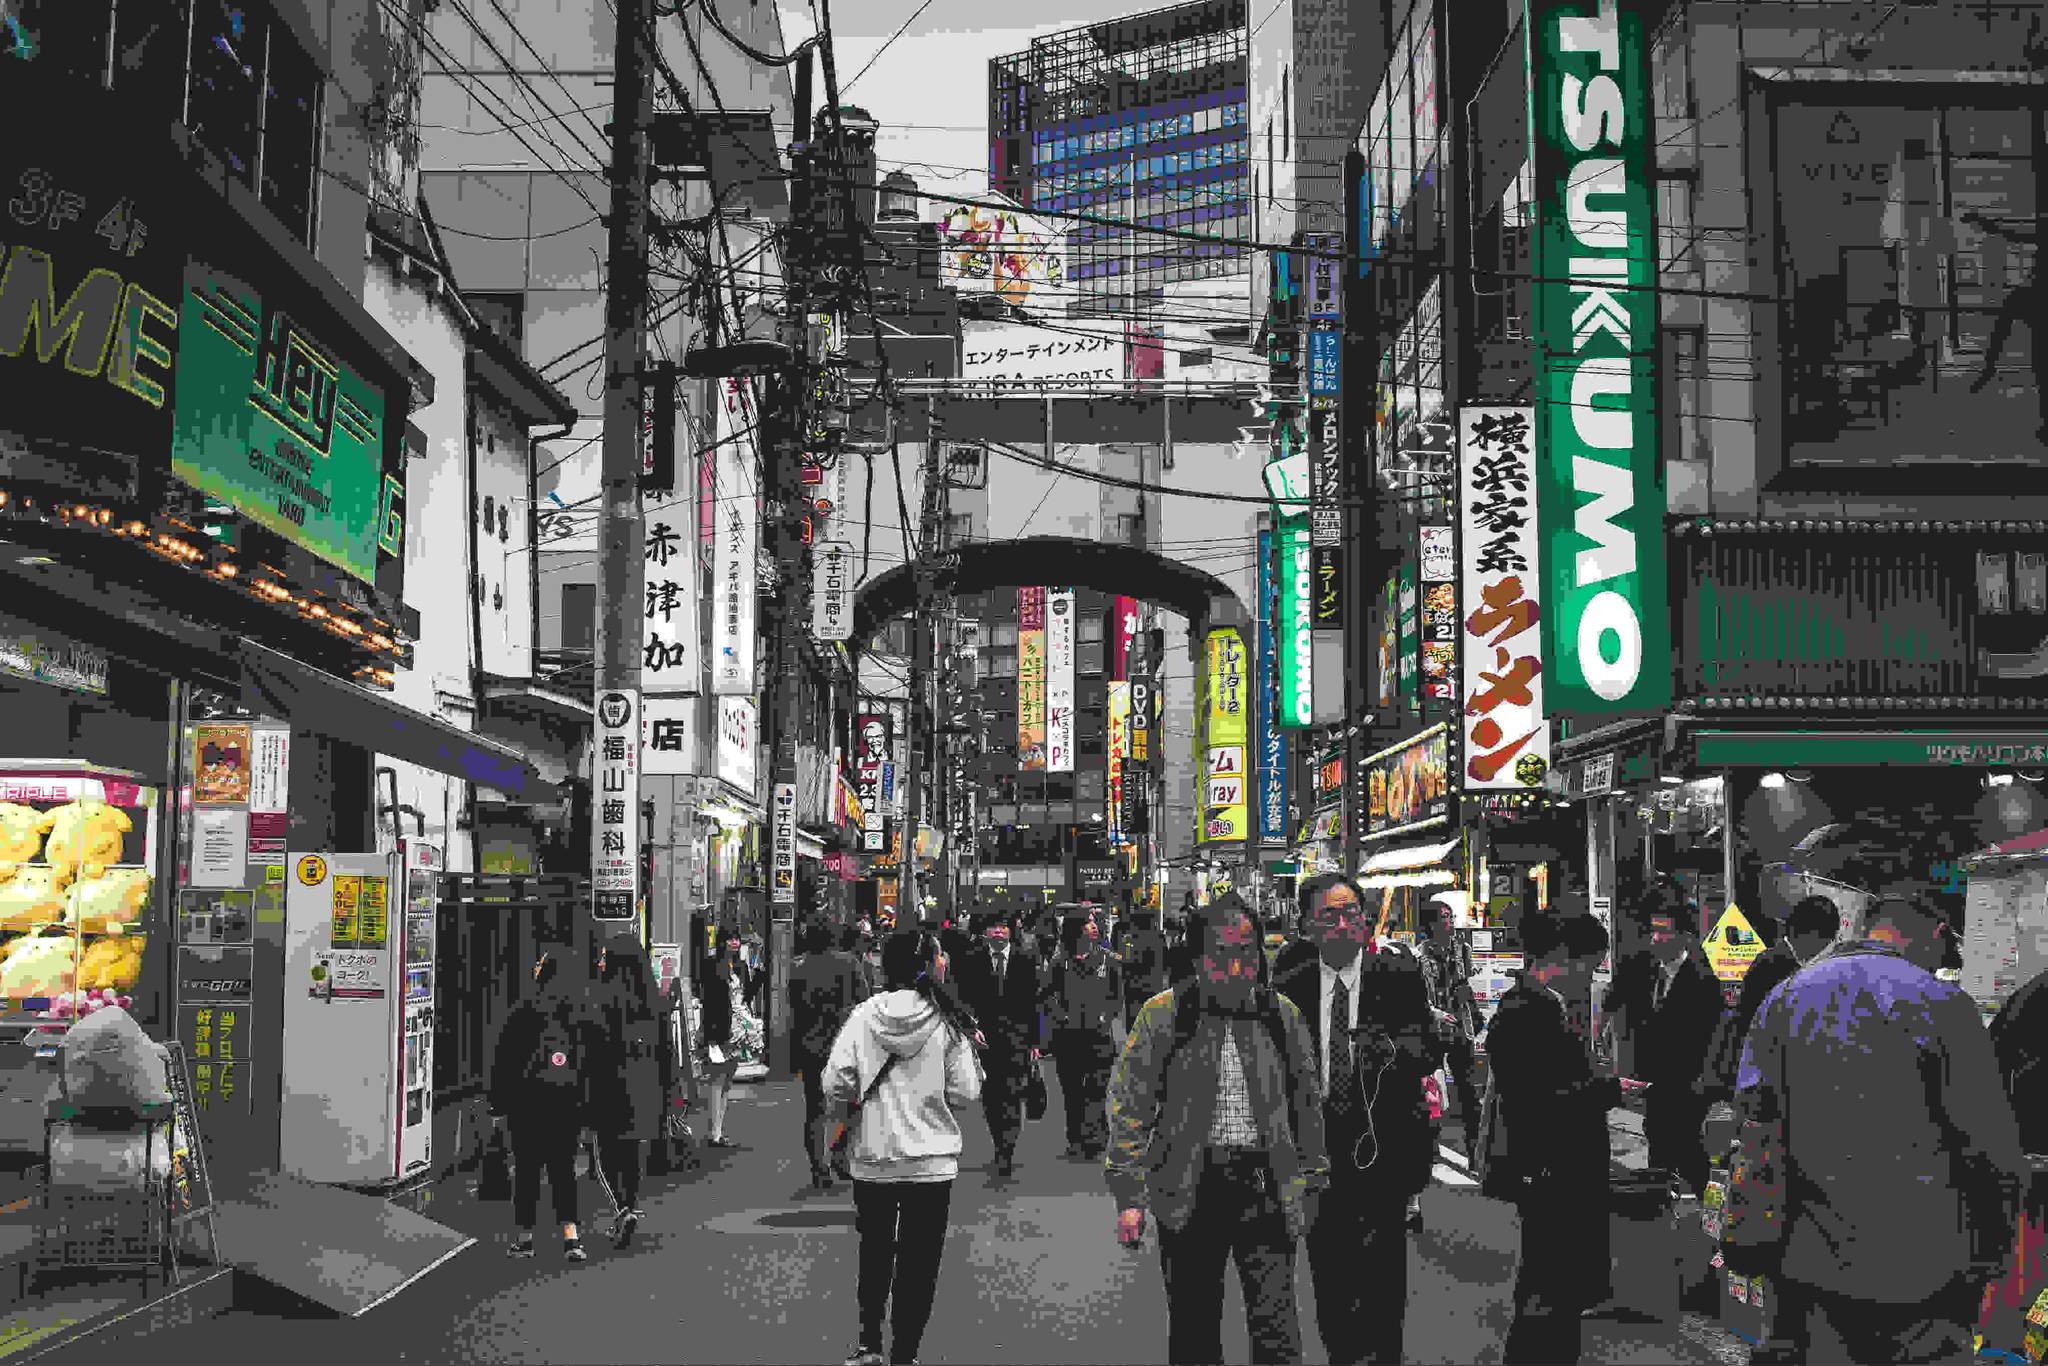 Japan embraces green health with legal cannabis ad